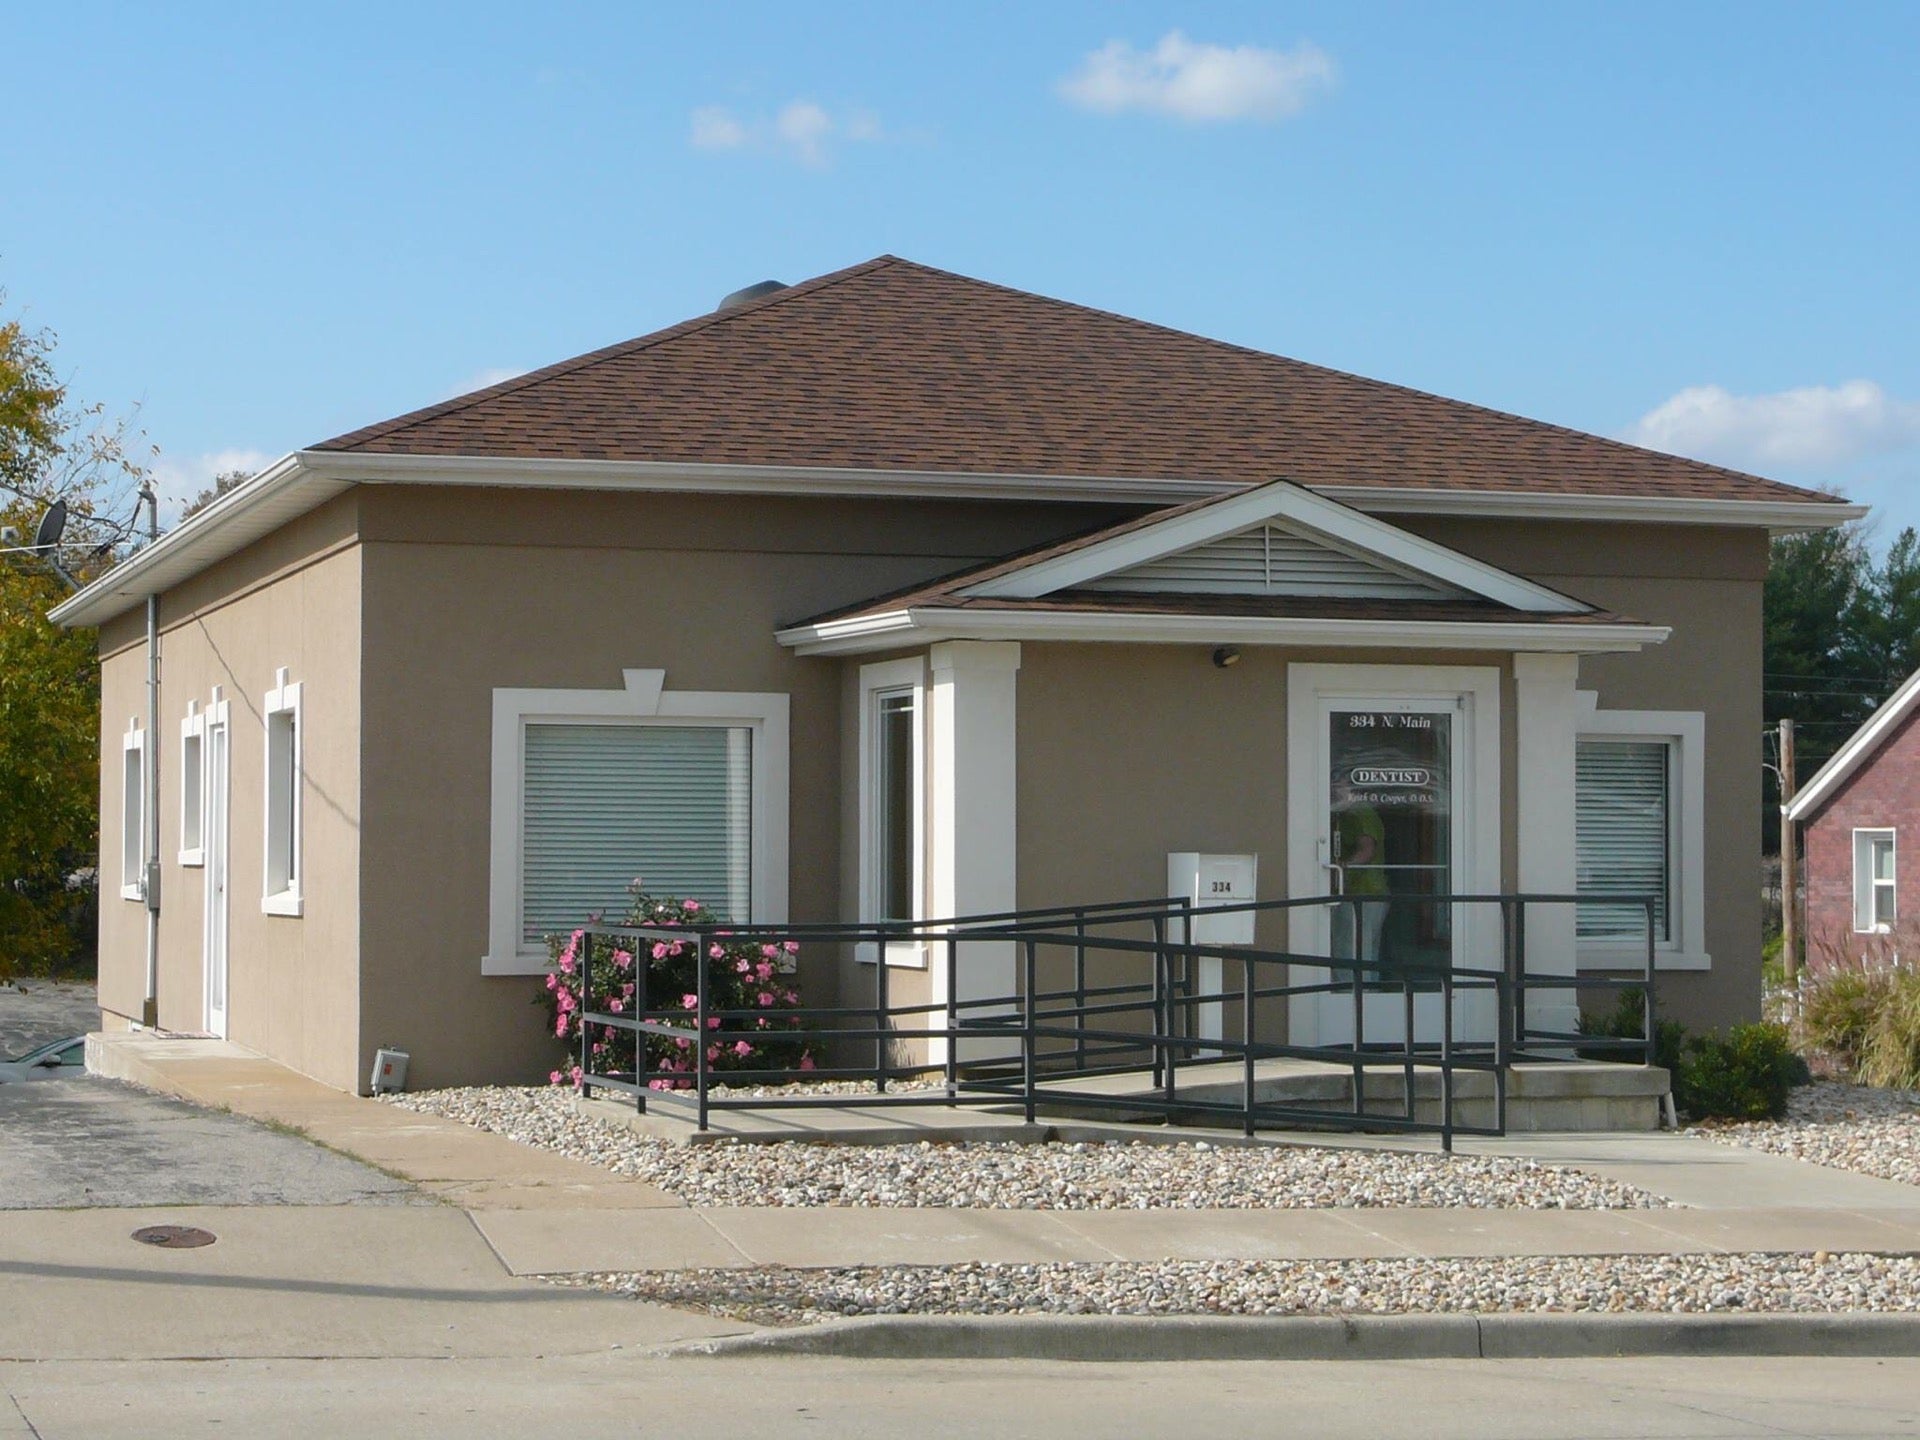 Dr. Keith D. Cooper, DDS 334 N Main St, Perryville Missouri 63775